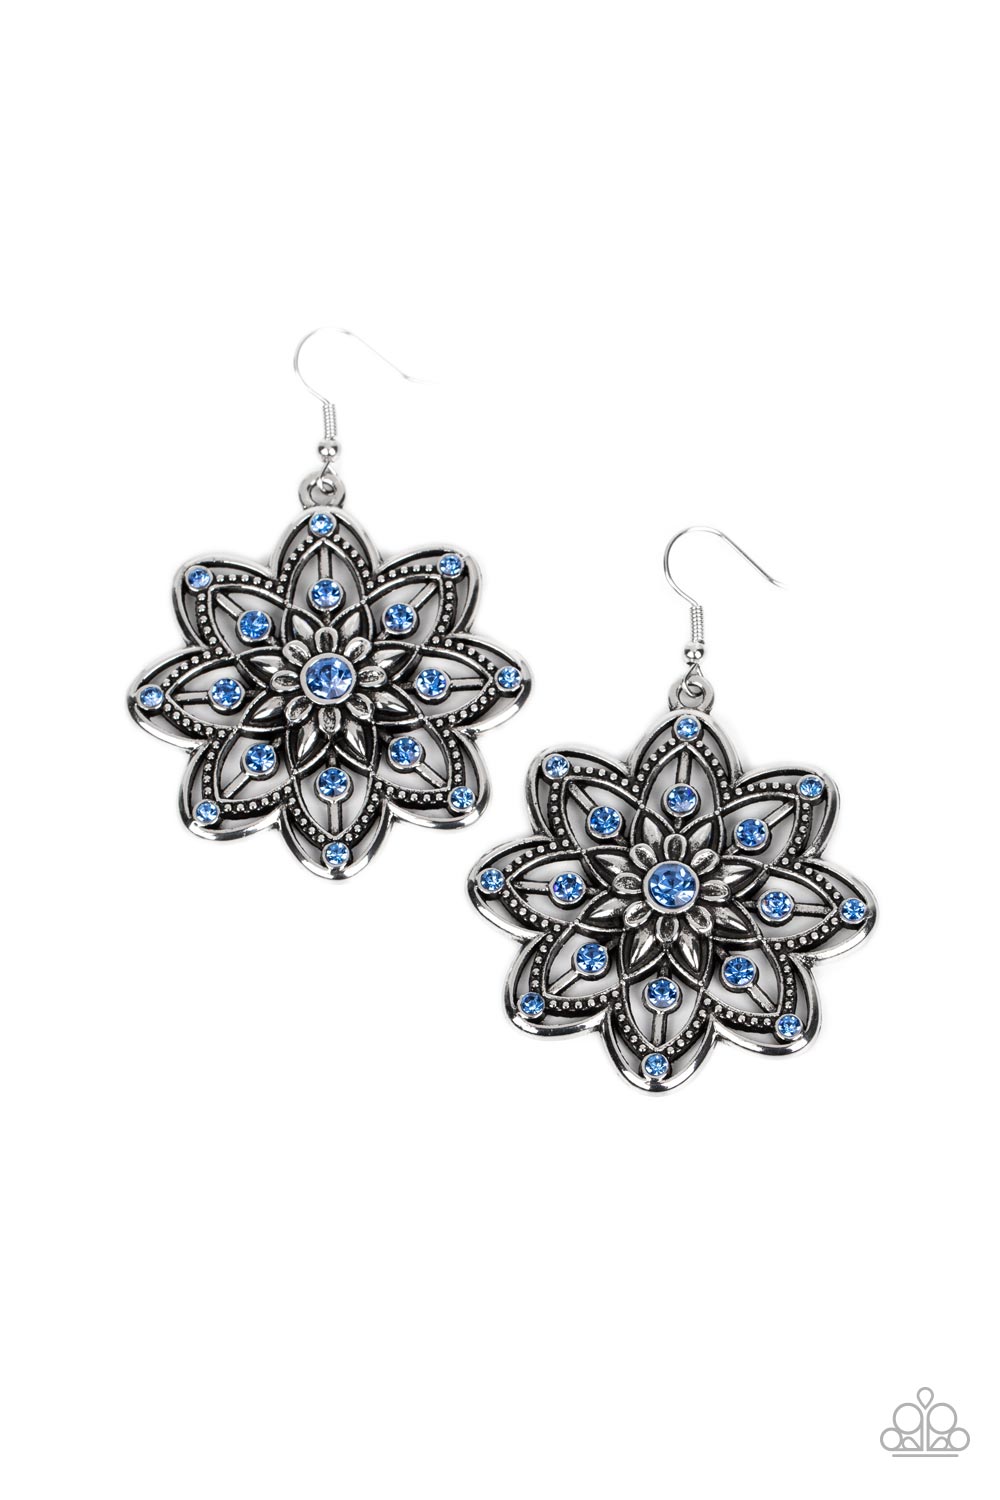 Prismatic Perennial - Blue and Silver Earrings - Paparazzi Accessories - Dotted in Glacier Lake rhinestones, rows of smooth and studded silver petals bloom from a Glacier Lake rhinestone center for a whimsical floral fashion.